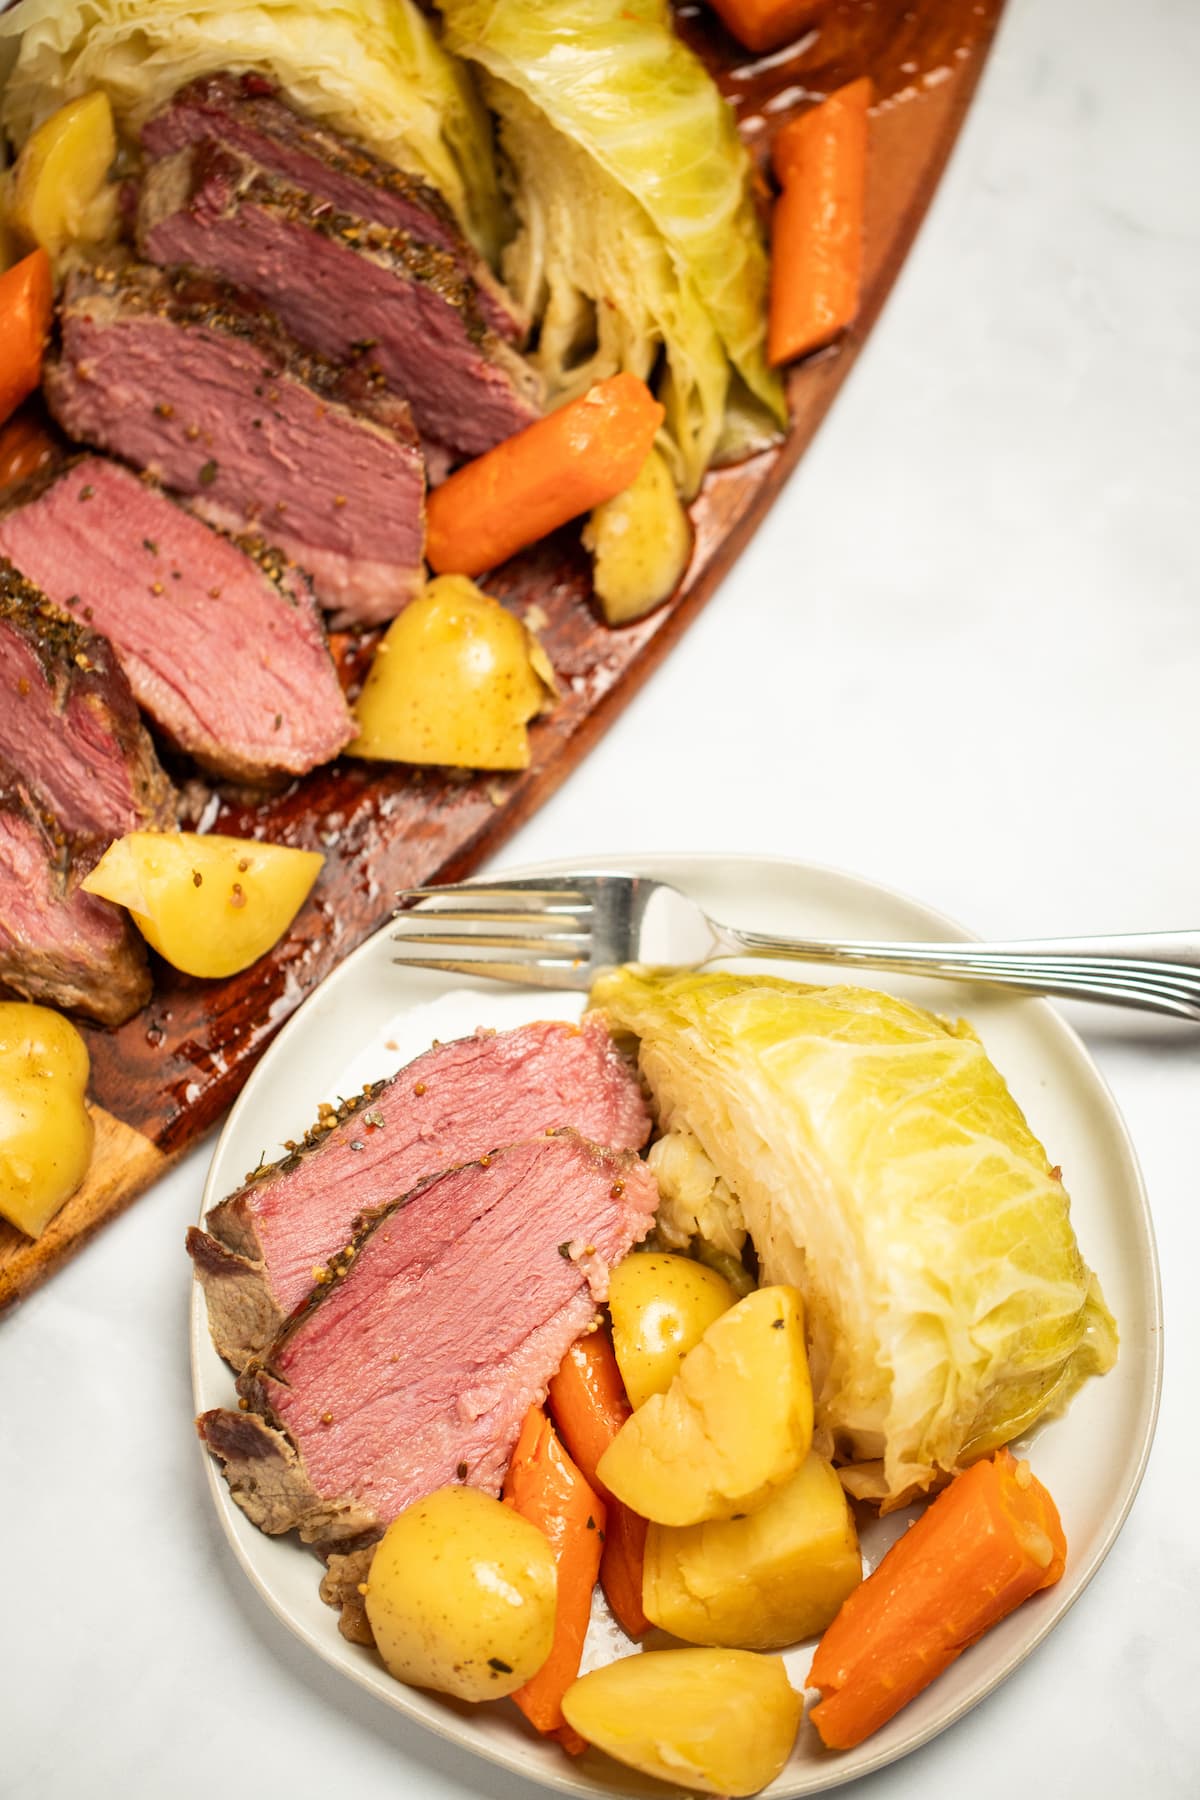 Instant pot corned beef with potatoes and cabbage on a wooden cutting board, next to a plate with corned beef, potatoes, cabbage, and carrots on it, with a fork on a table.